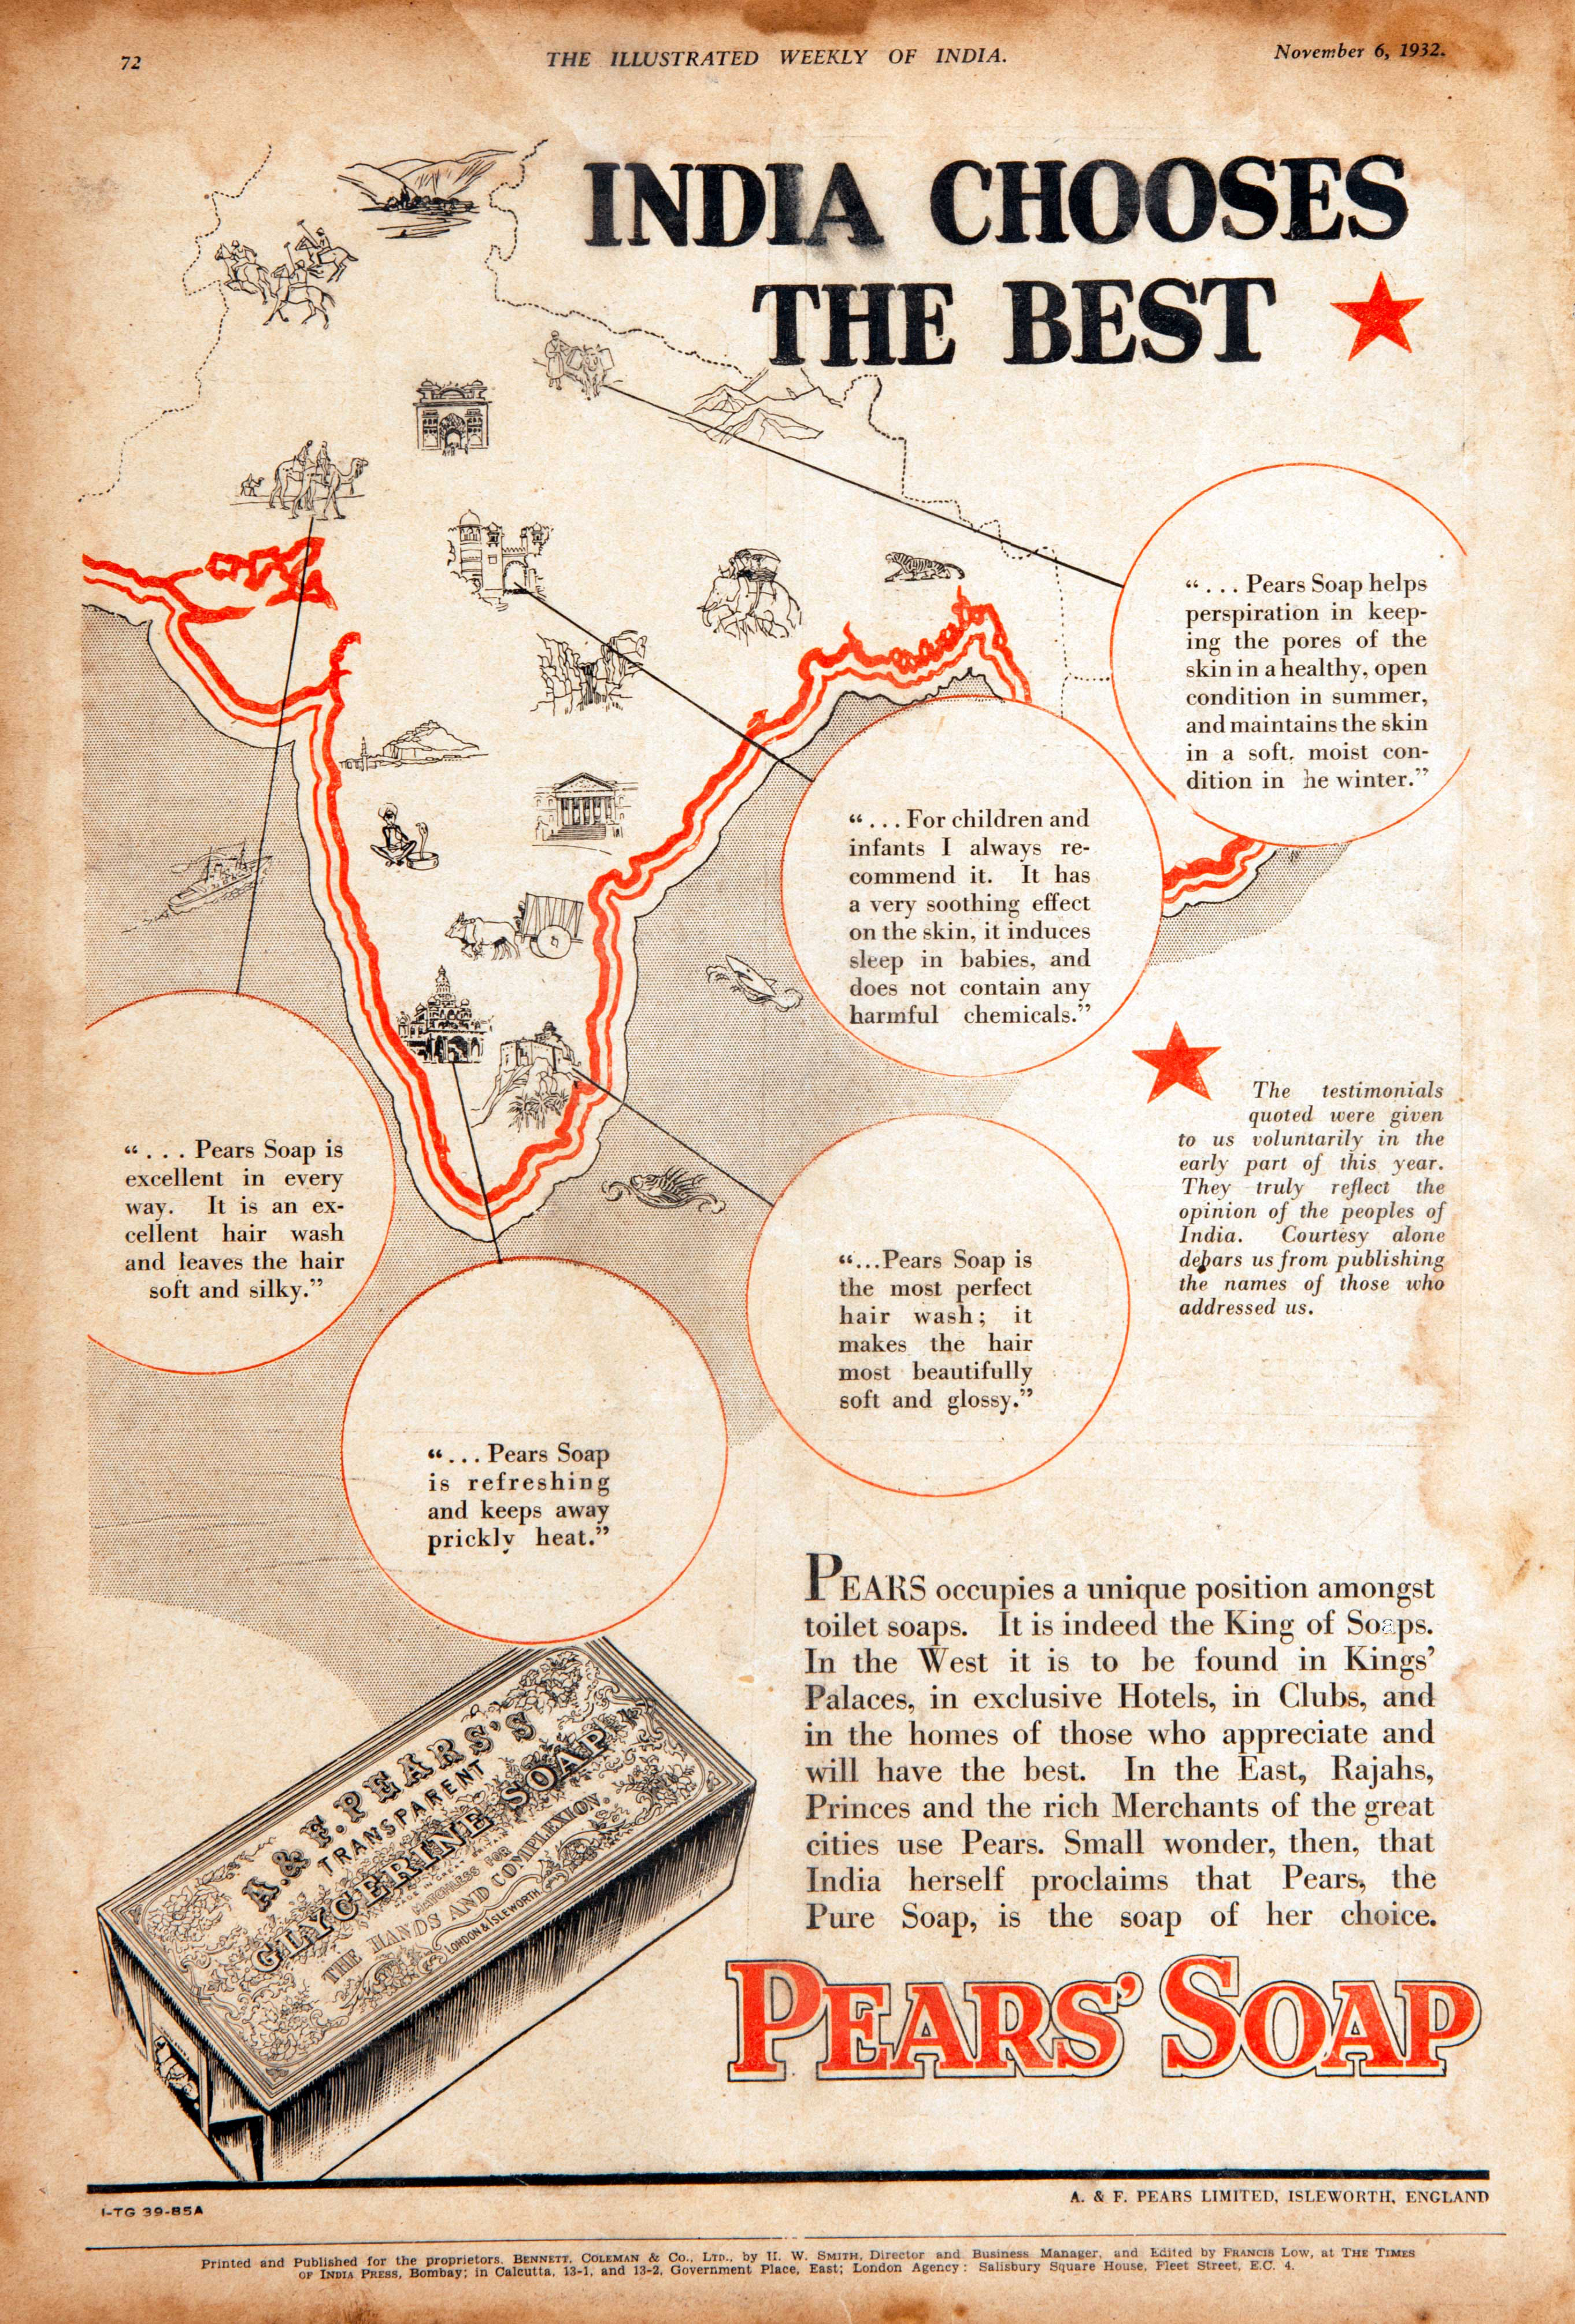 On the top is an illustrated map of India with the words “India chooses best” written in black and bold above it. Testimonials from users across the country are linked to regions highlighted on the map. There is an illustrated Pears soap bar at the bottom left. At the bottom right is promotional text, below which “Pears Soap” is written in a stylistic font in red.